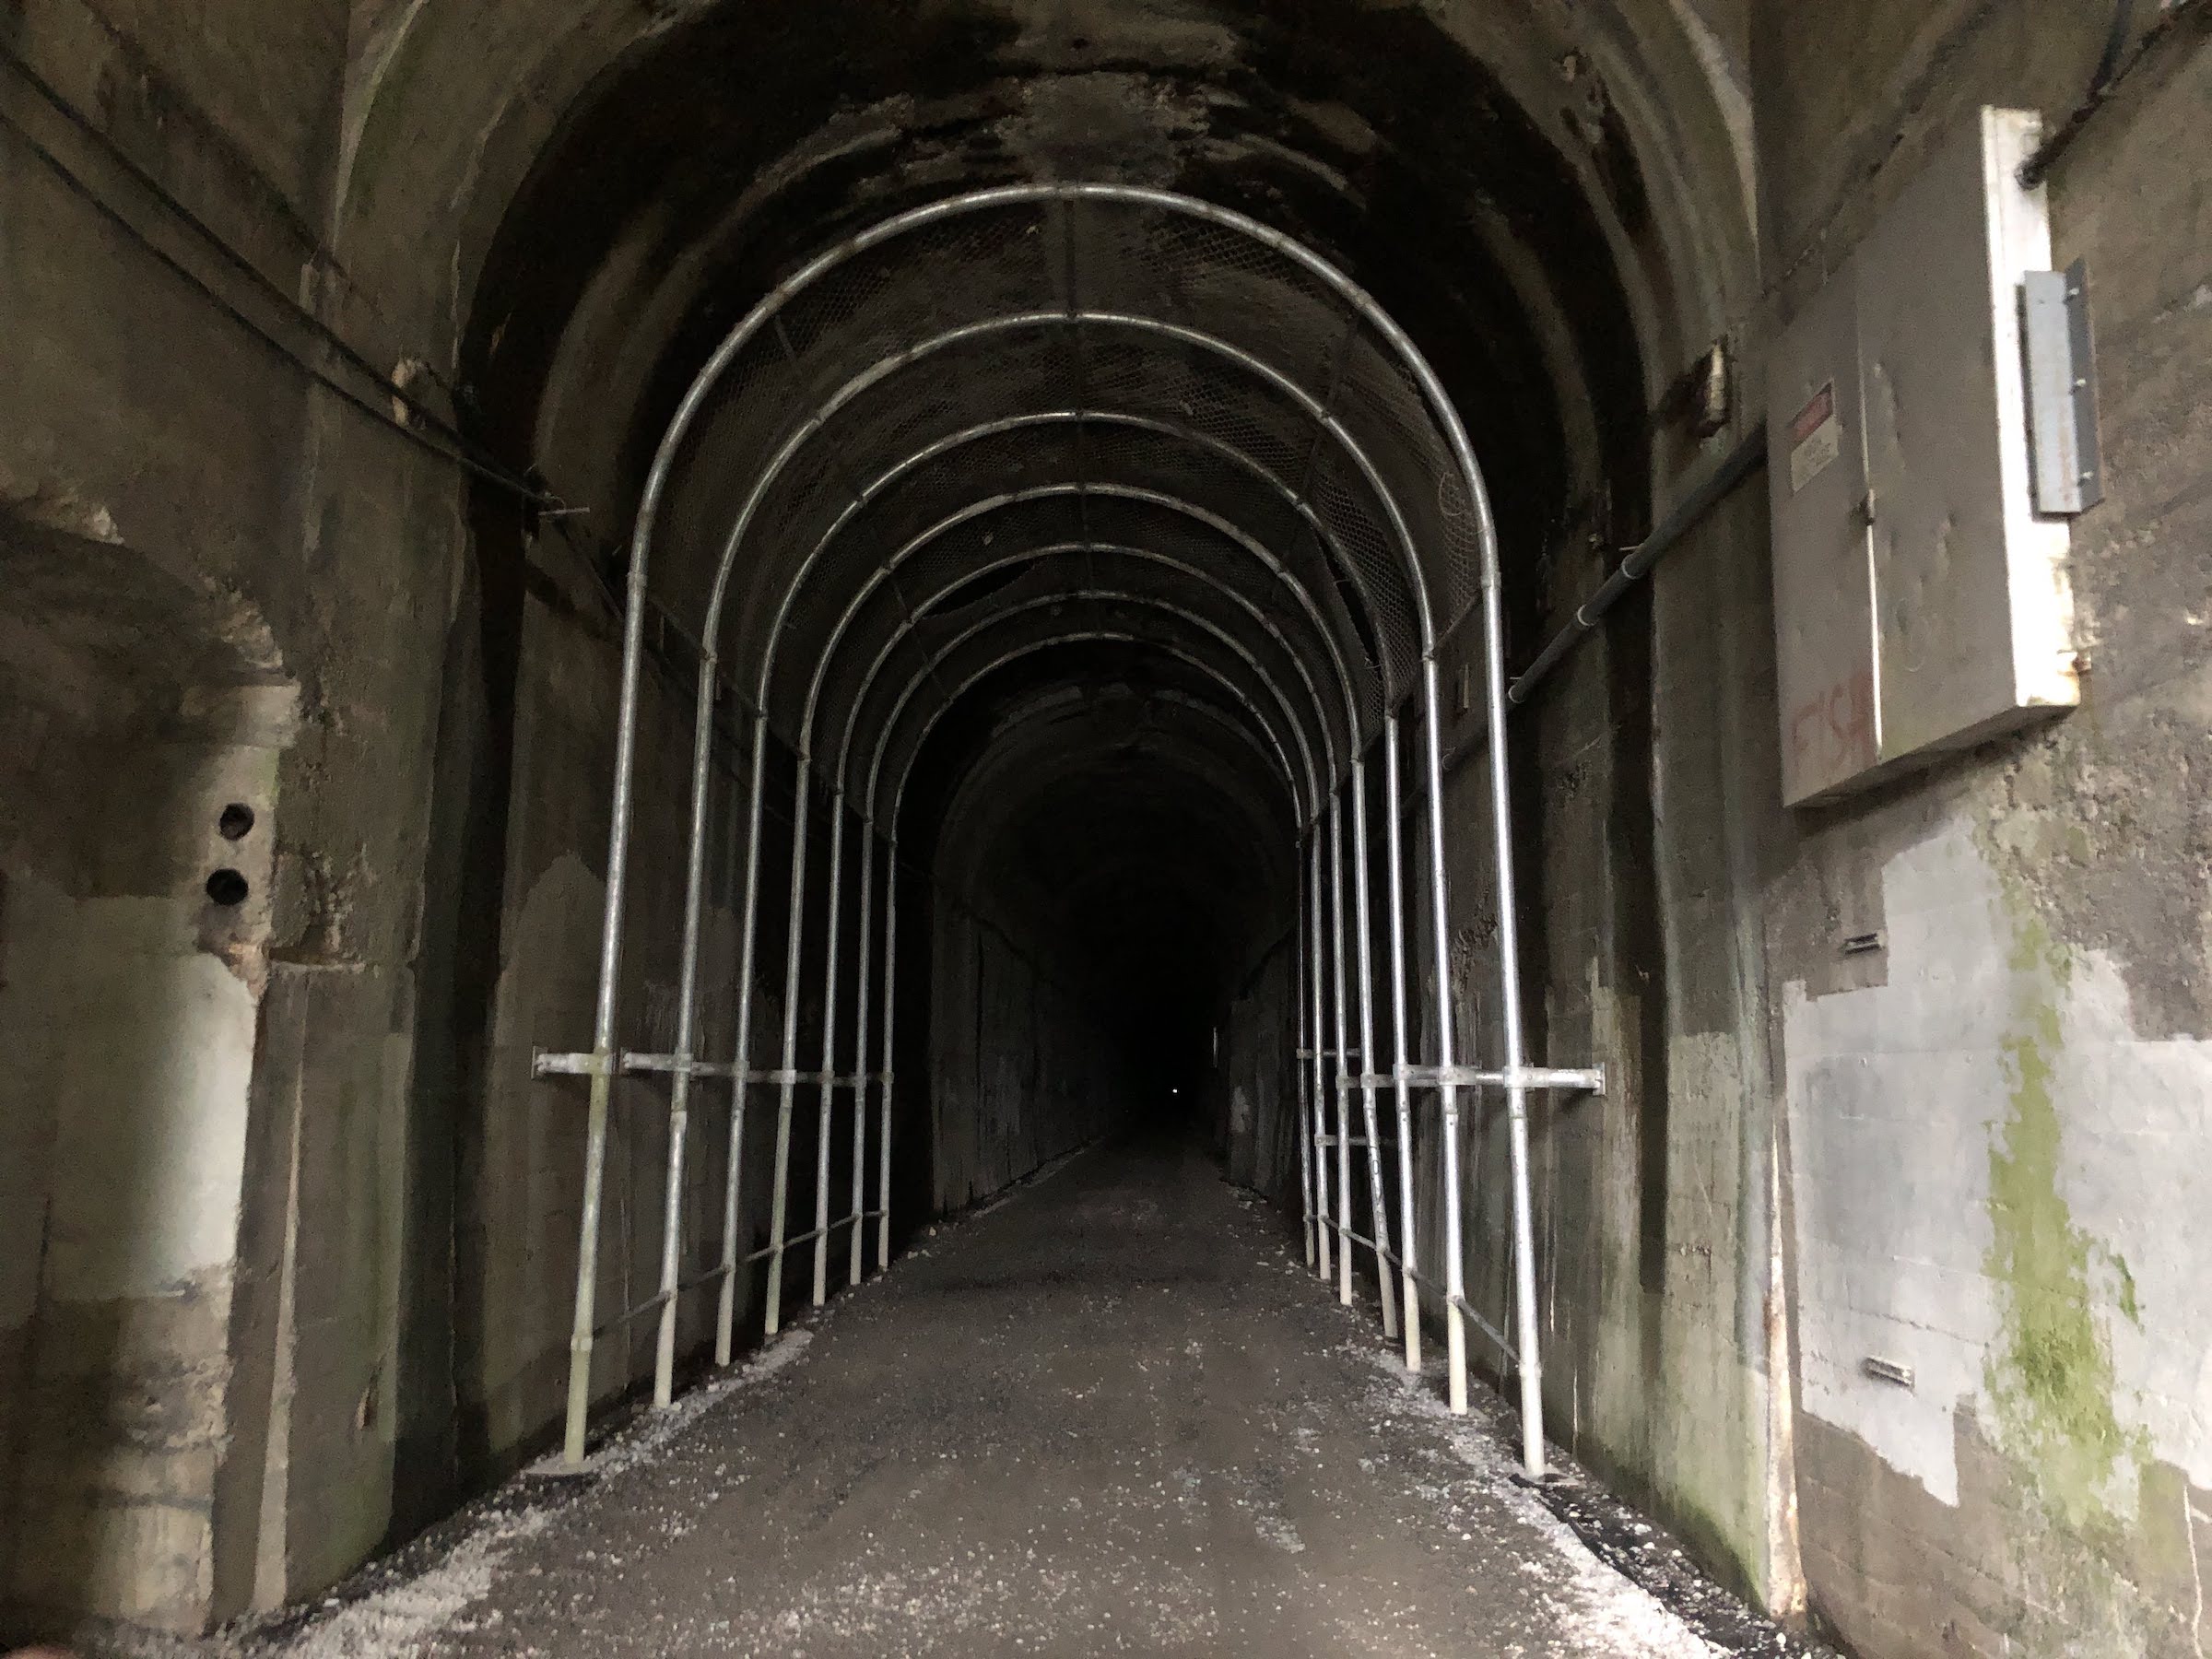 an old train tunnel with a tiny speck of light from the other end